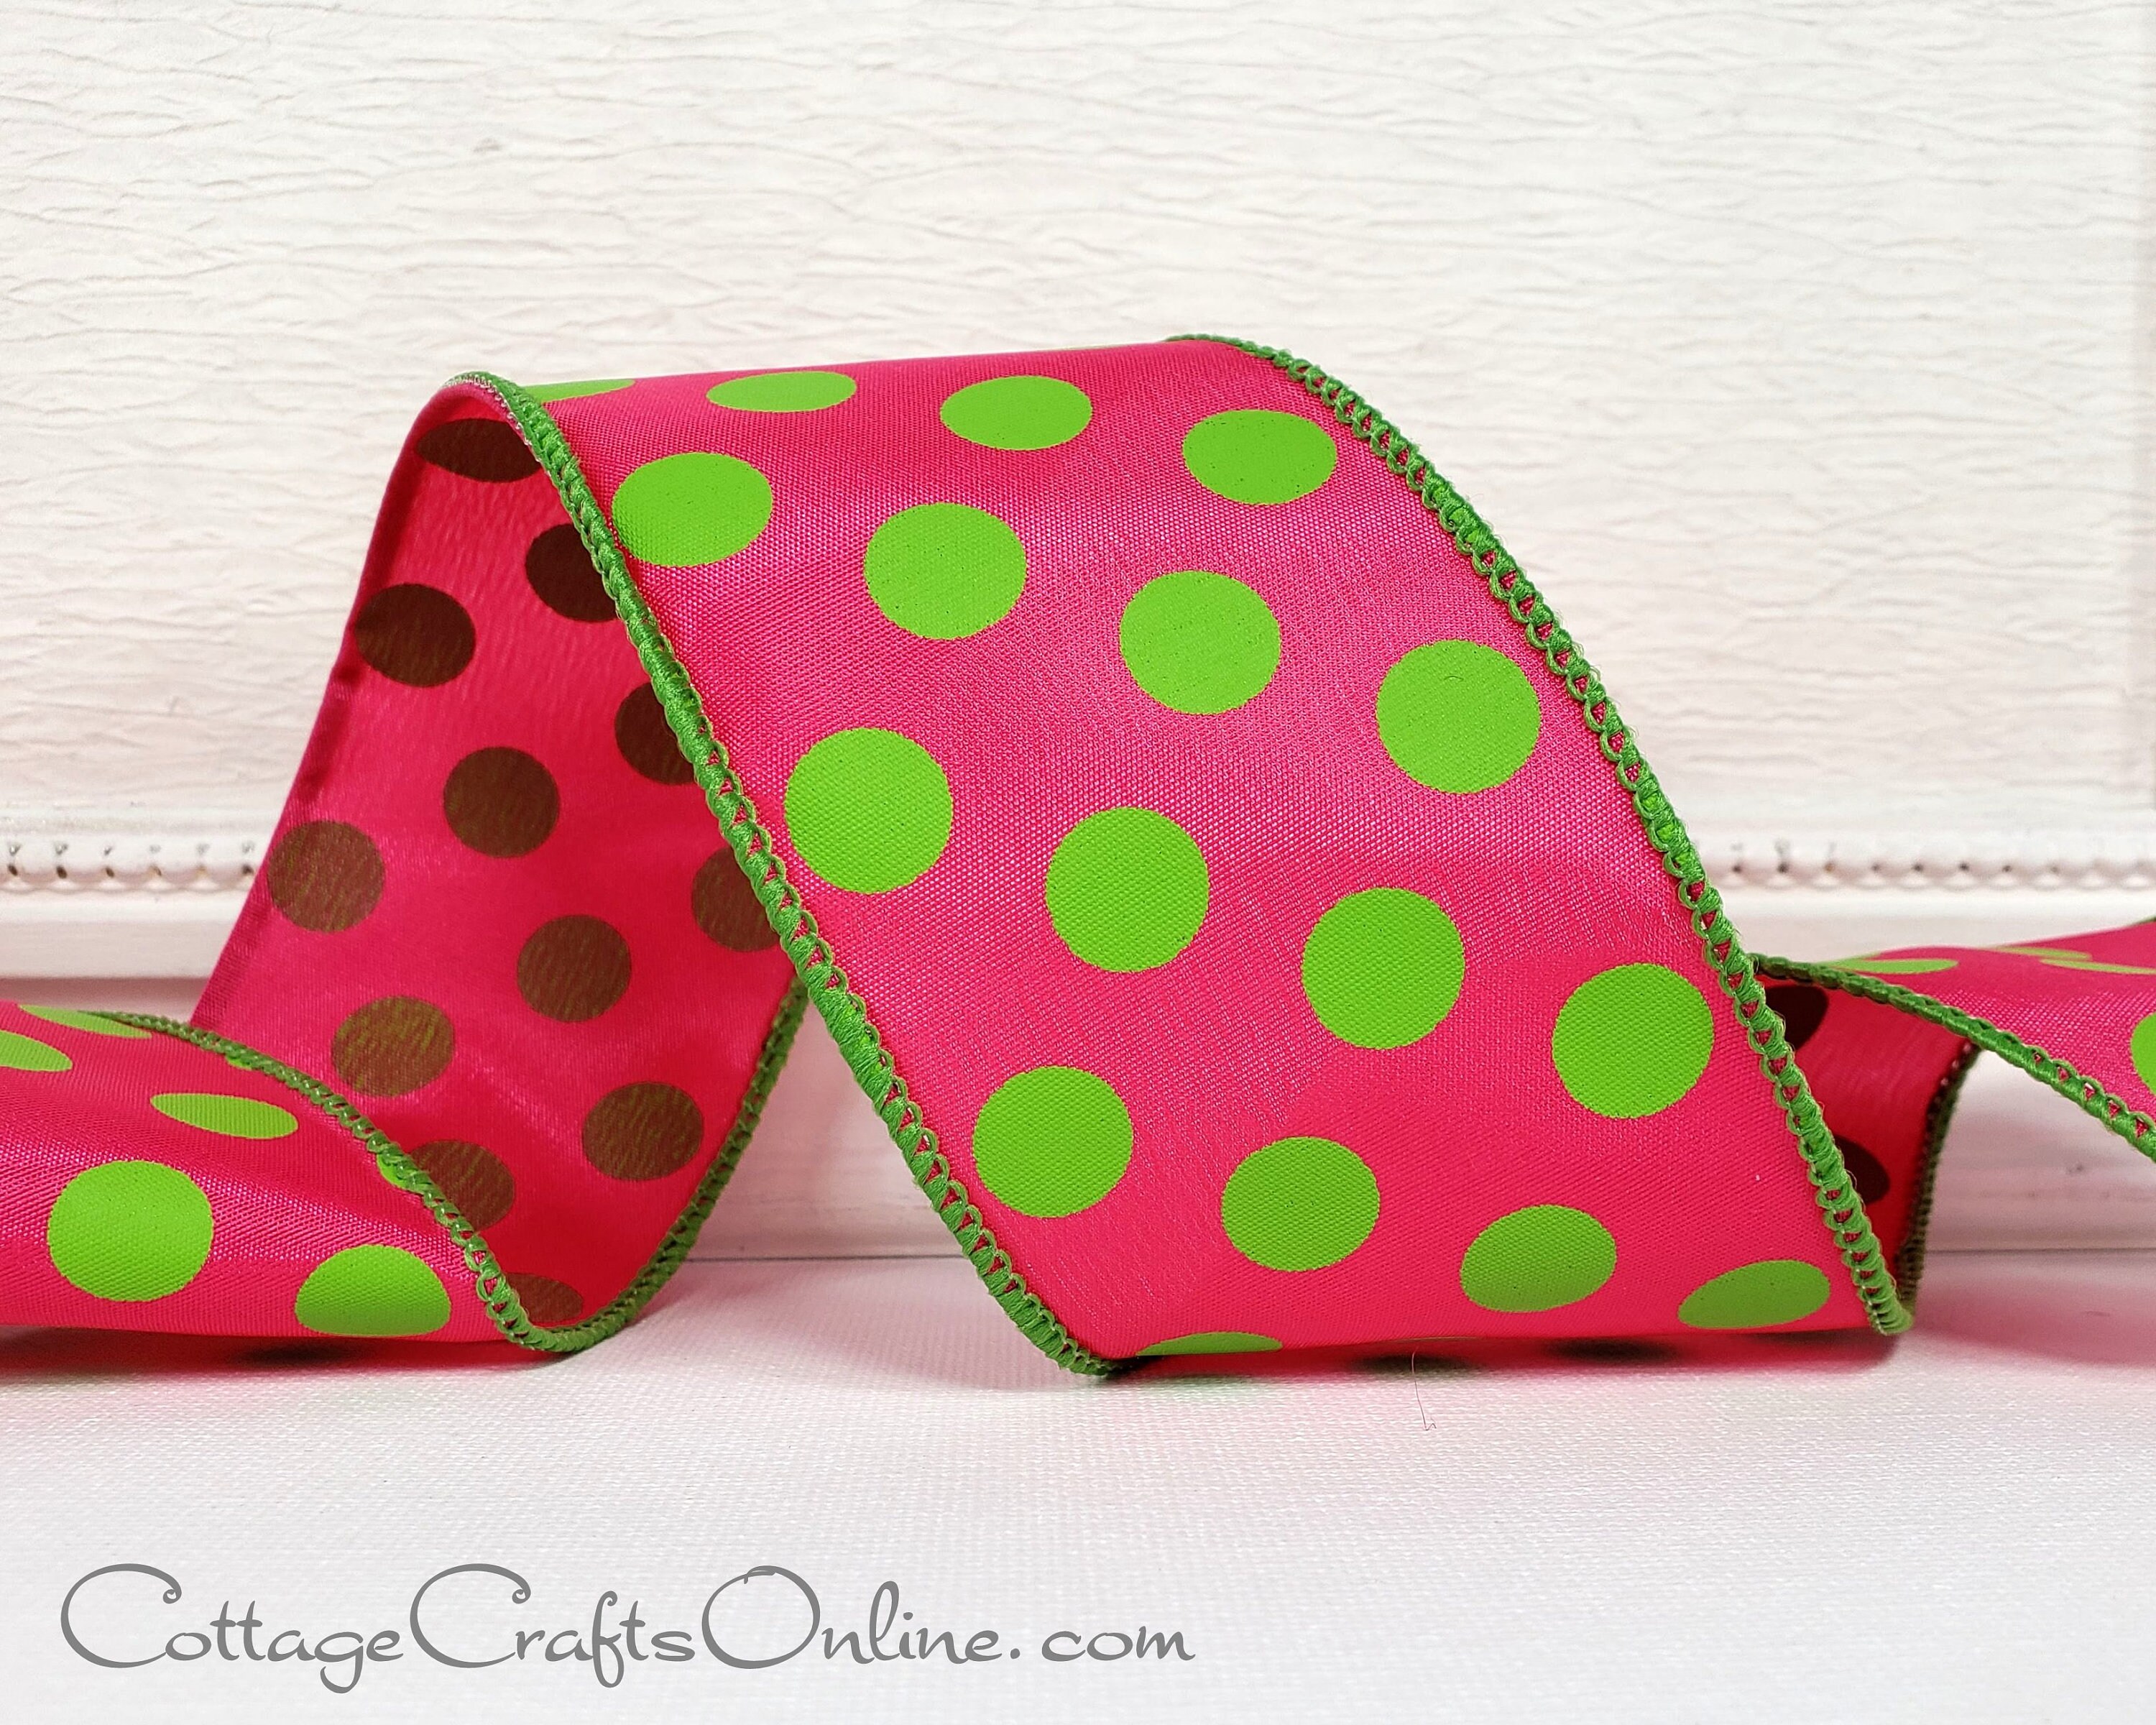 Hot Pink Dot Ribbon Pink Dotted Ribbon Wired 1 1/2 Inch 